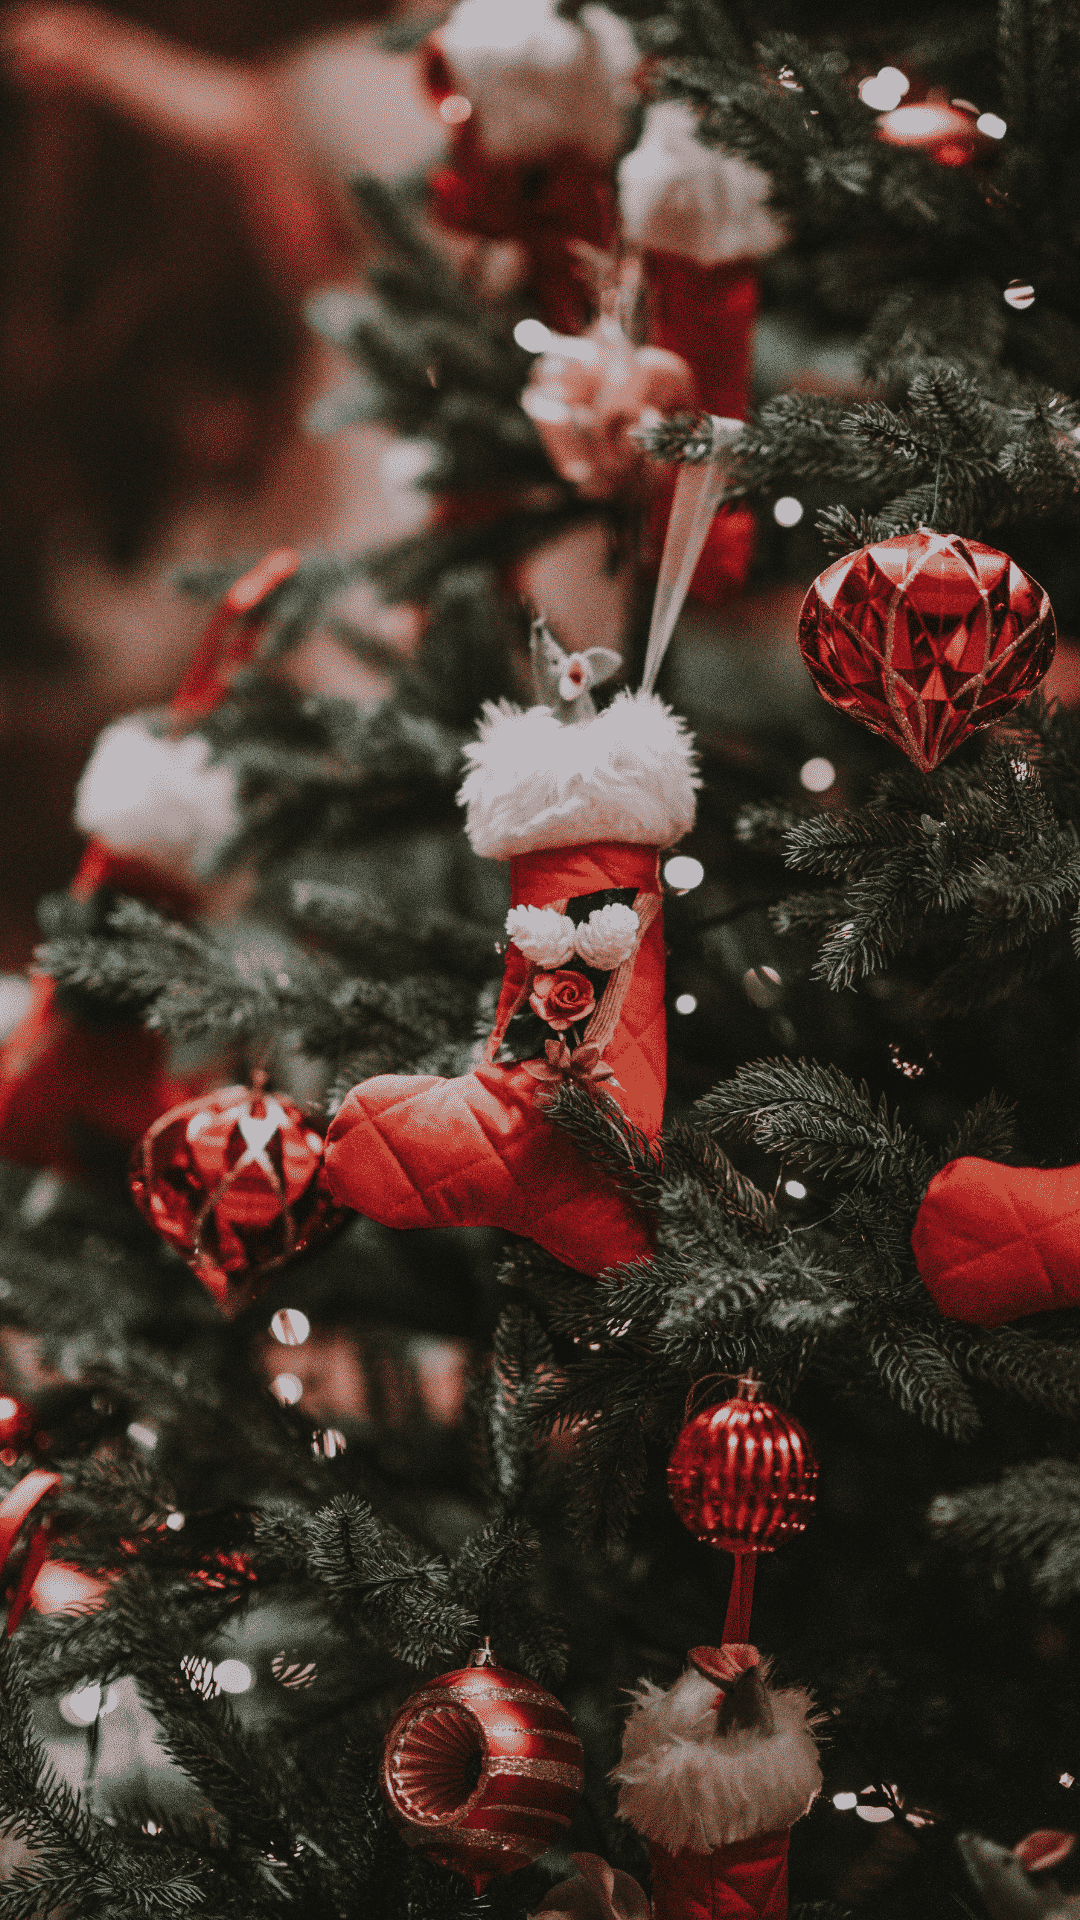 FREE Aesthetic Christmas Wallpaper For A Festive Phone